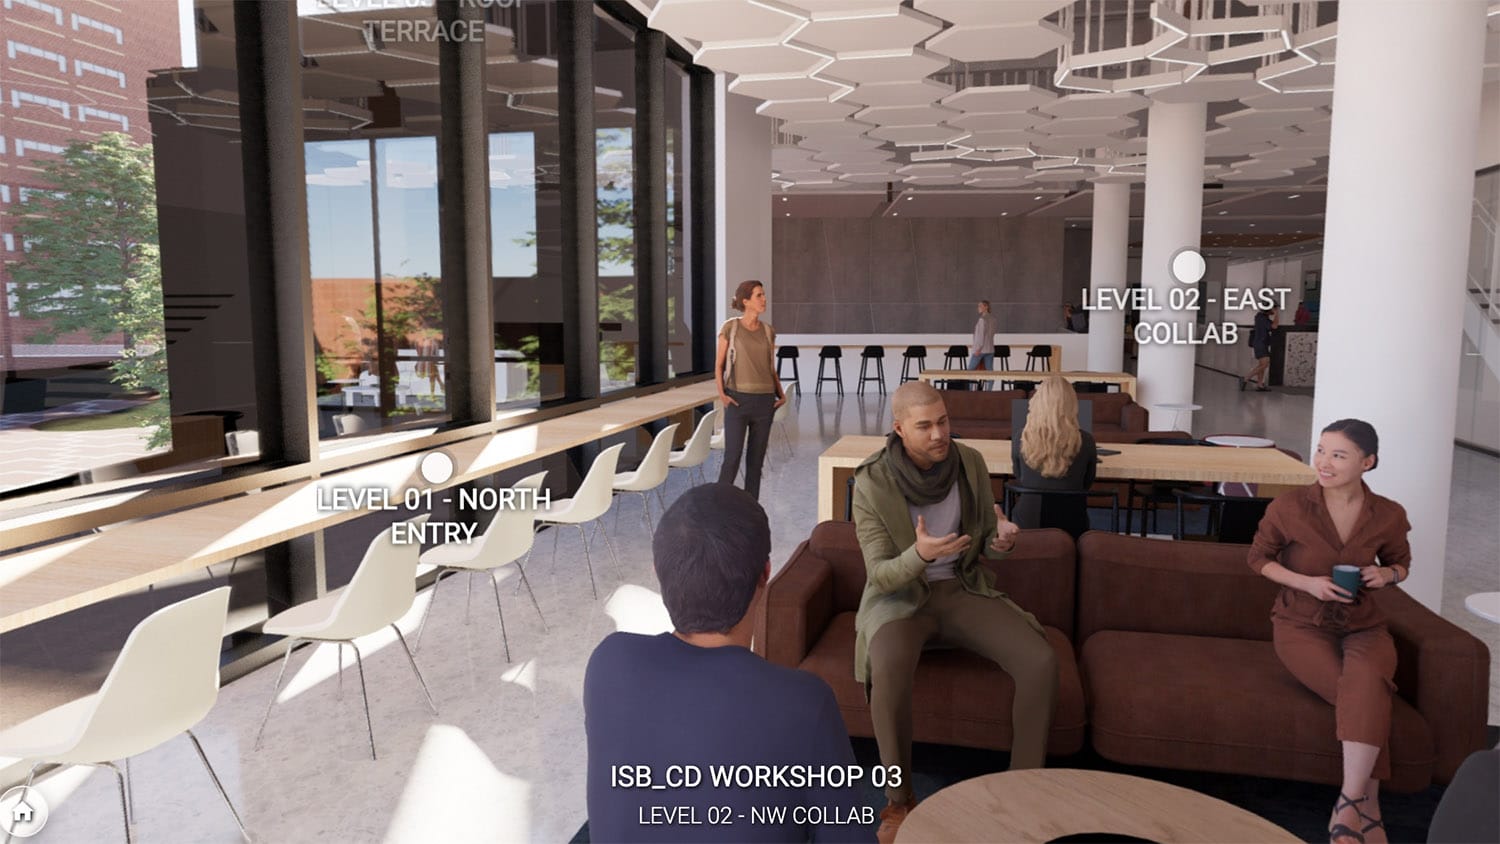 Screenshot from the virtual tour of the Integrative Sciences Buildings.